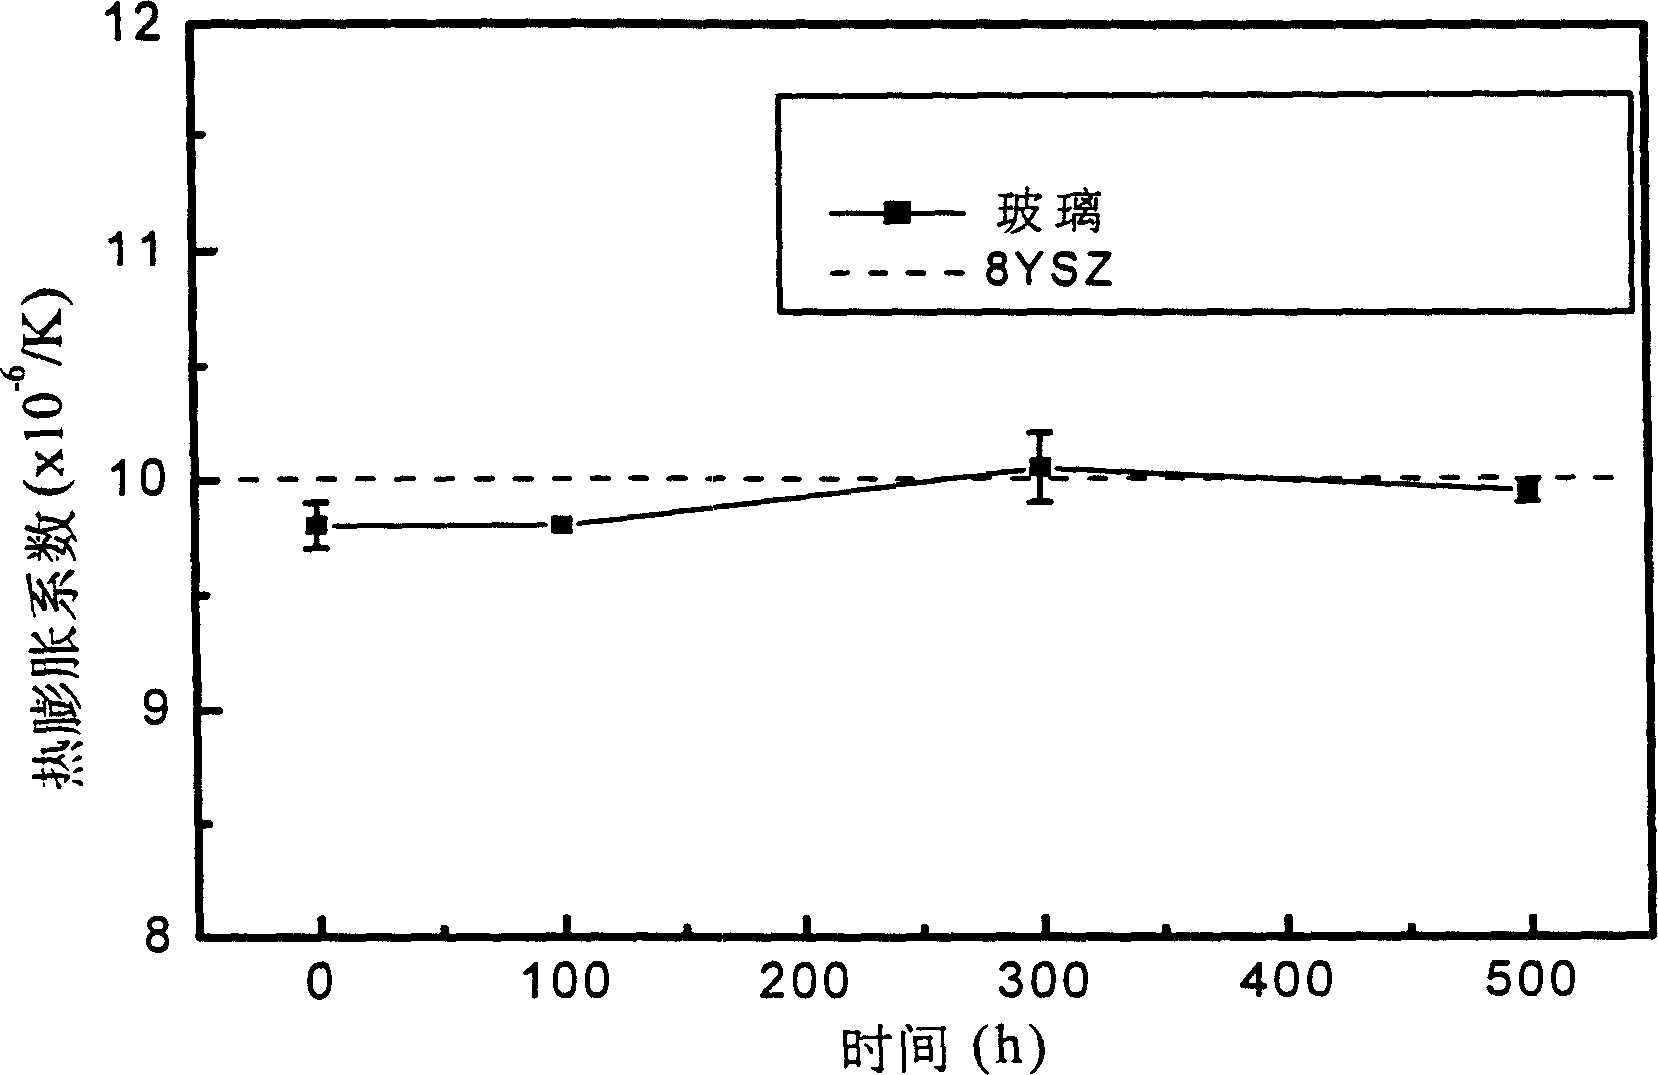 Mesotherm hermetic glass and hermetic method for solid oxide fuel cell